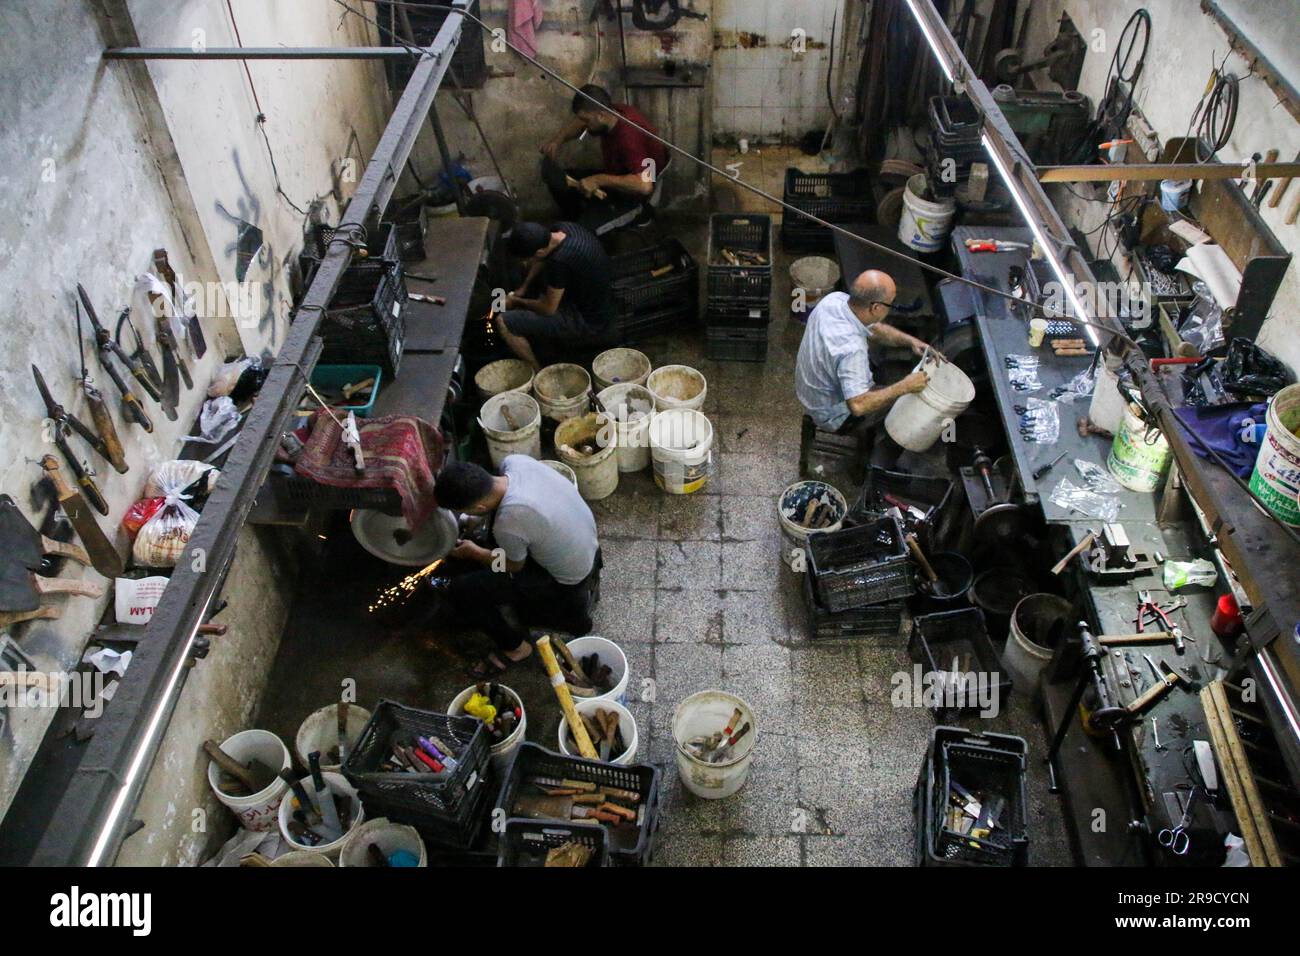 https://c8.alamy.com/comp/2R9CYCN/june-25-2023-gaza-palestine-25-june-2023-a-busy-knife-sharpening-workshop-in-gaza-city-ahead-of-the-forthcoming-eid-al-adha-celebrations-eid-al-adha-or-feast-of-sacrifice-is-a-major-feast-in-islam-which-is-celebrated-on-the-last-day-of-the-hajj-pilgrimage-it-is-a-tradition-to-sacrifice-an-animal-such-as-a-sheep-or-a-goat-during-eid-al-adha-to-remember-prophet-ibrahims-obedience-to-god-credit-image-ahmad-hasaballahimageslive-via-zuma-press-wire-editorial-usage-only!-not-for-commercial-usage!-2R9CYCN.jpg